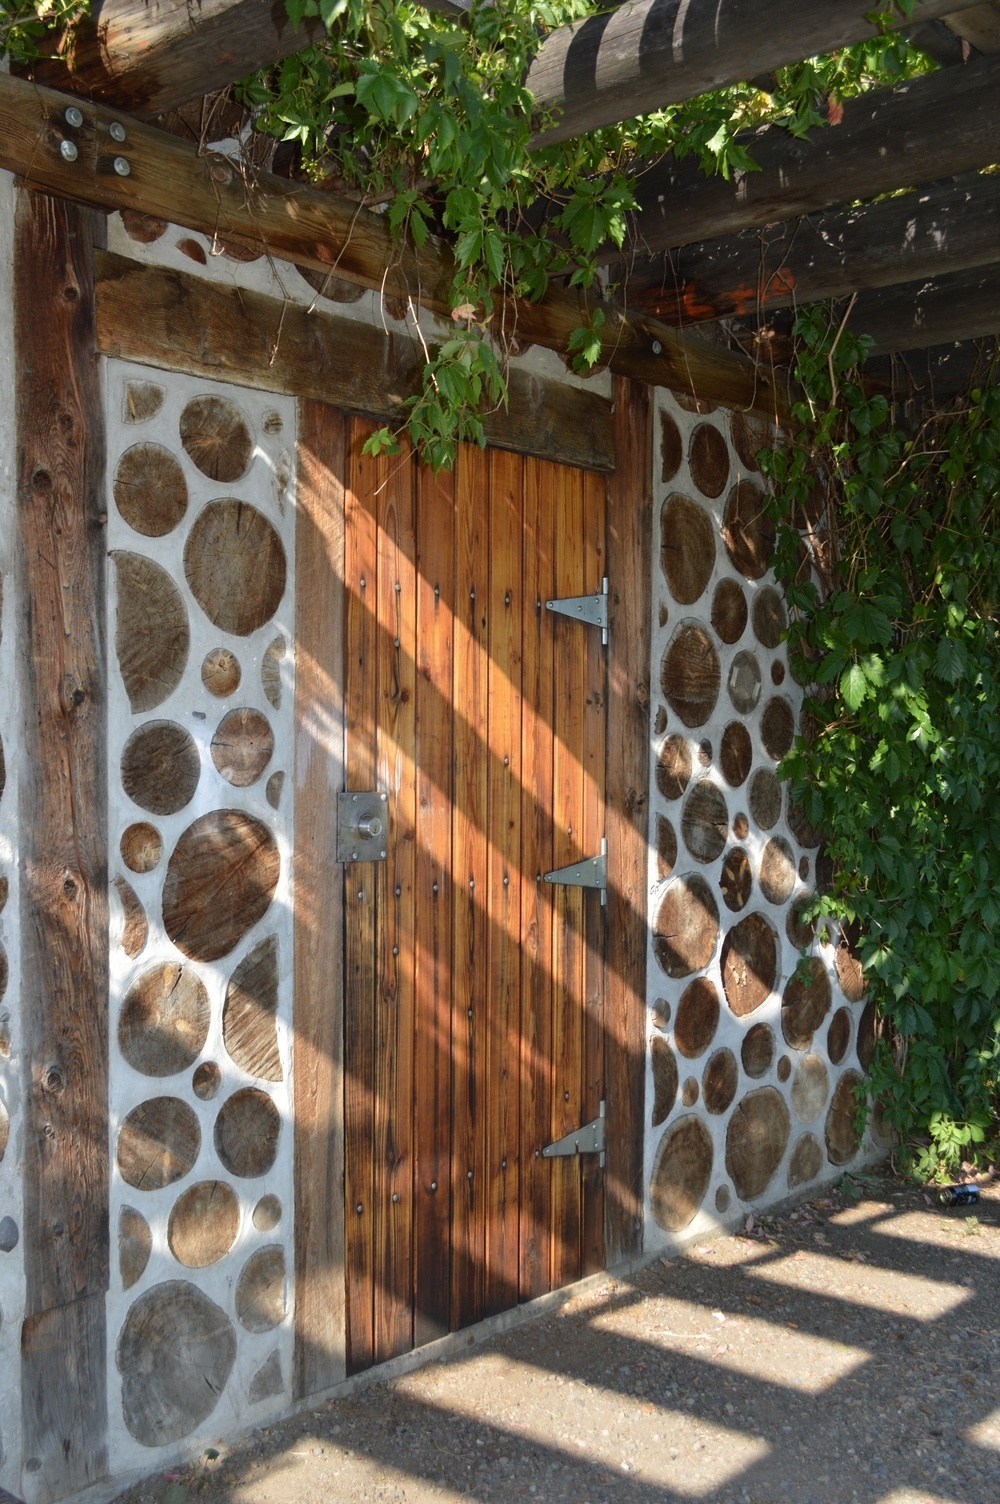 Detail of Cordwood Wall at the Community Garden